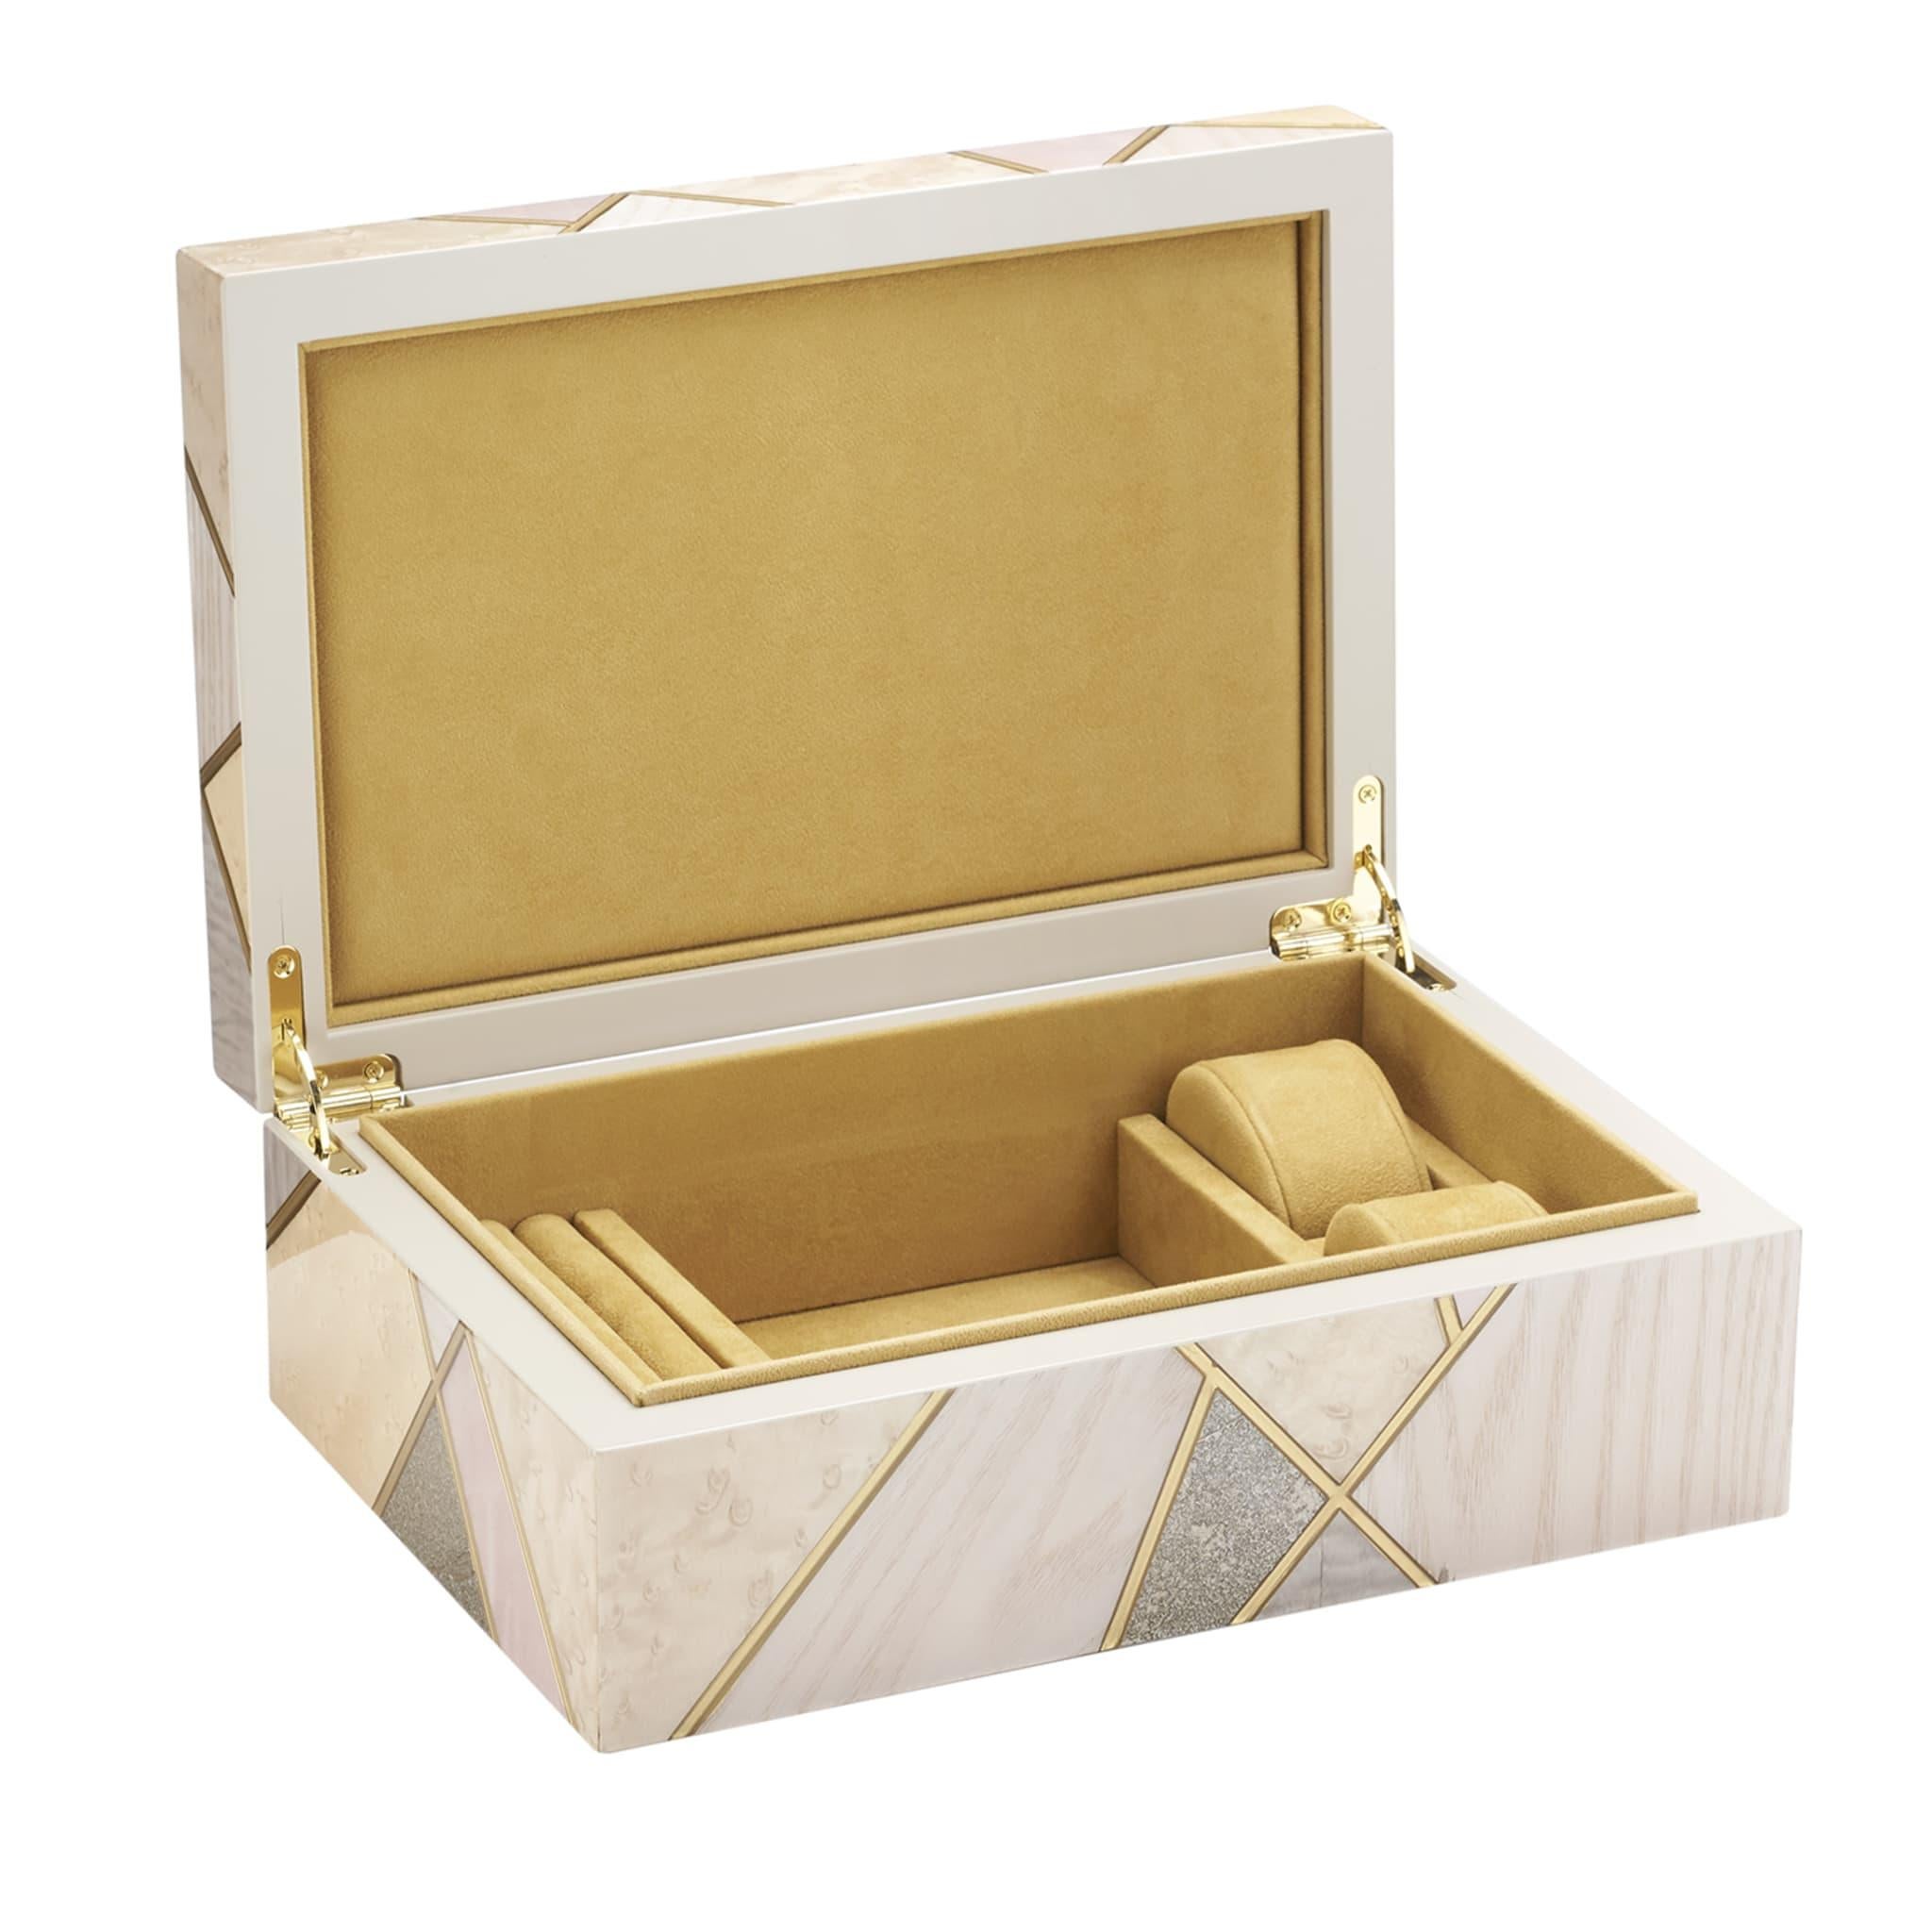 Masterfully handcrafted and unique, this jewelry box is a triumph of precious wooden inlays of Bolivar, ash, rosewood, and ebony made feminine by a palette of delicate tones of beige and pink. Golden profiles cross the silhouette, underlining the